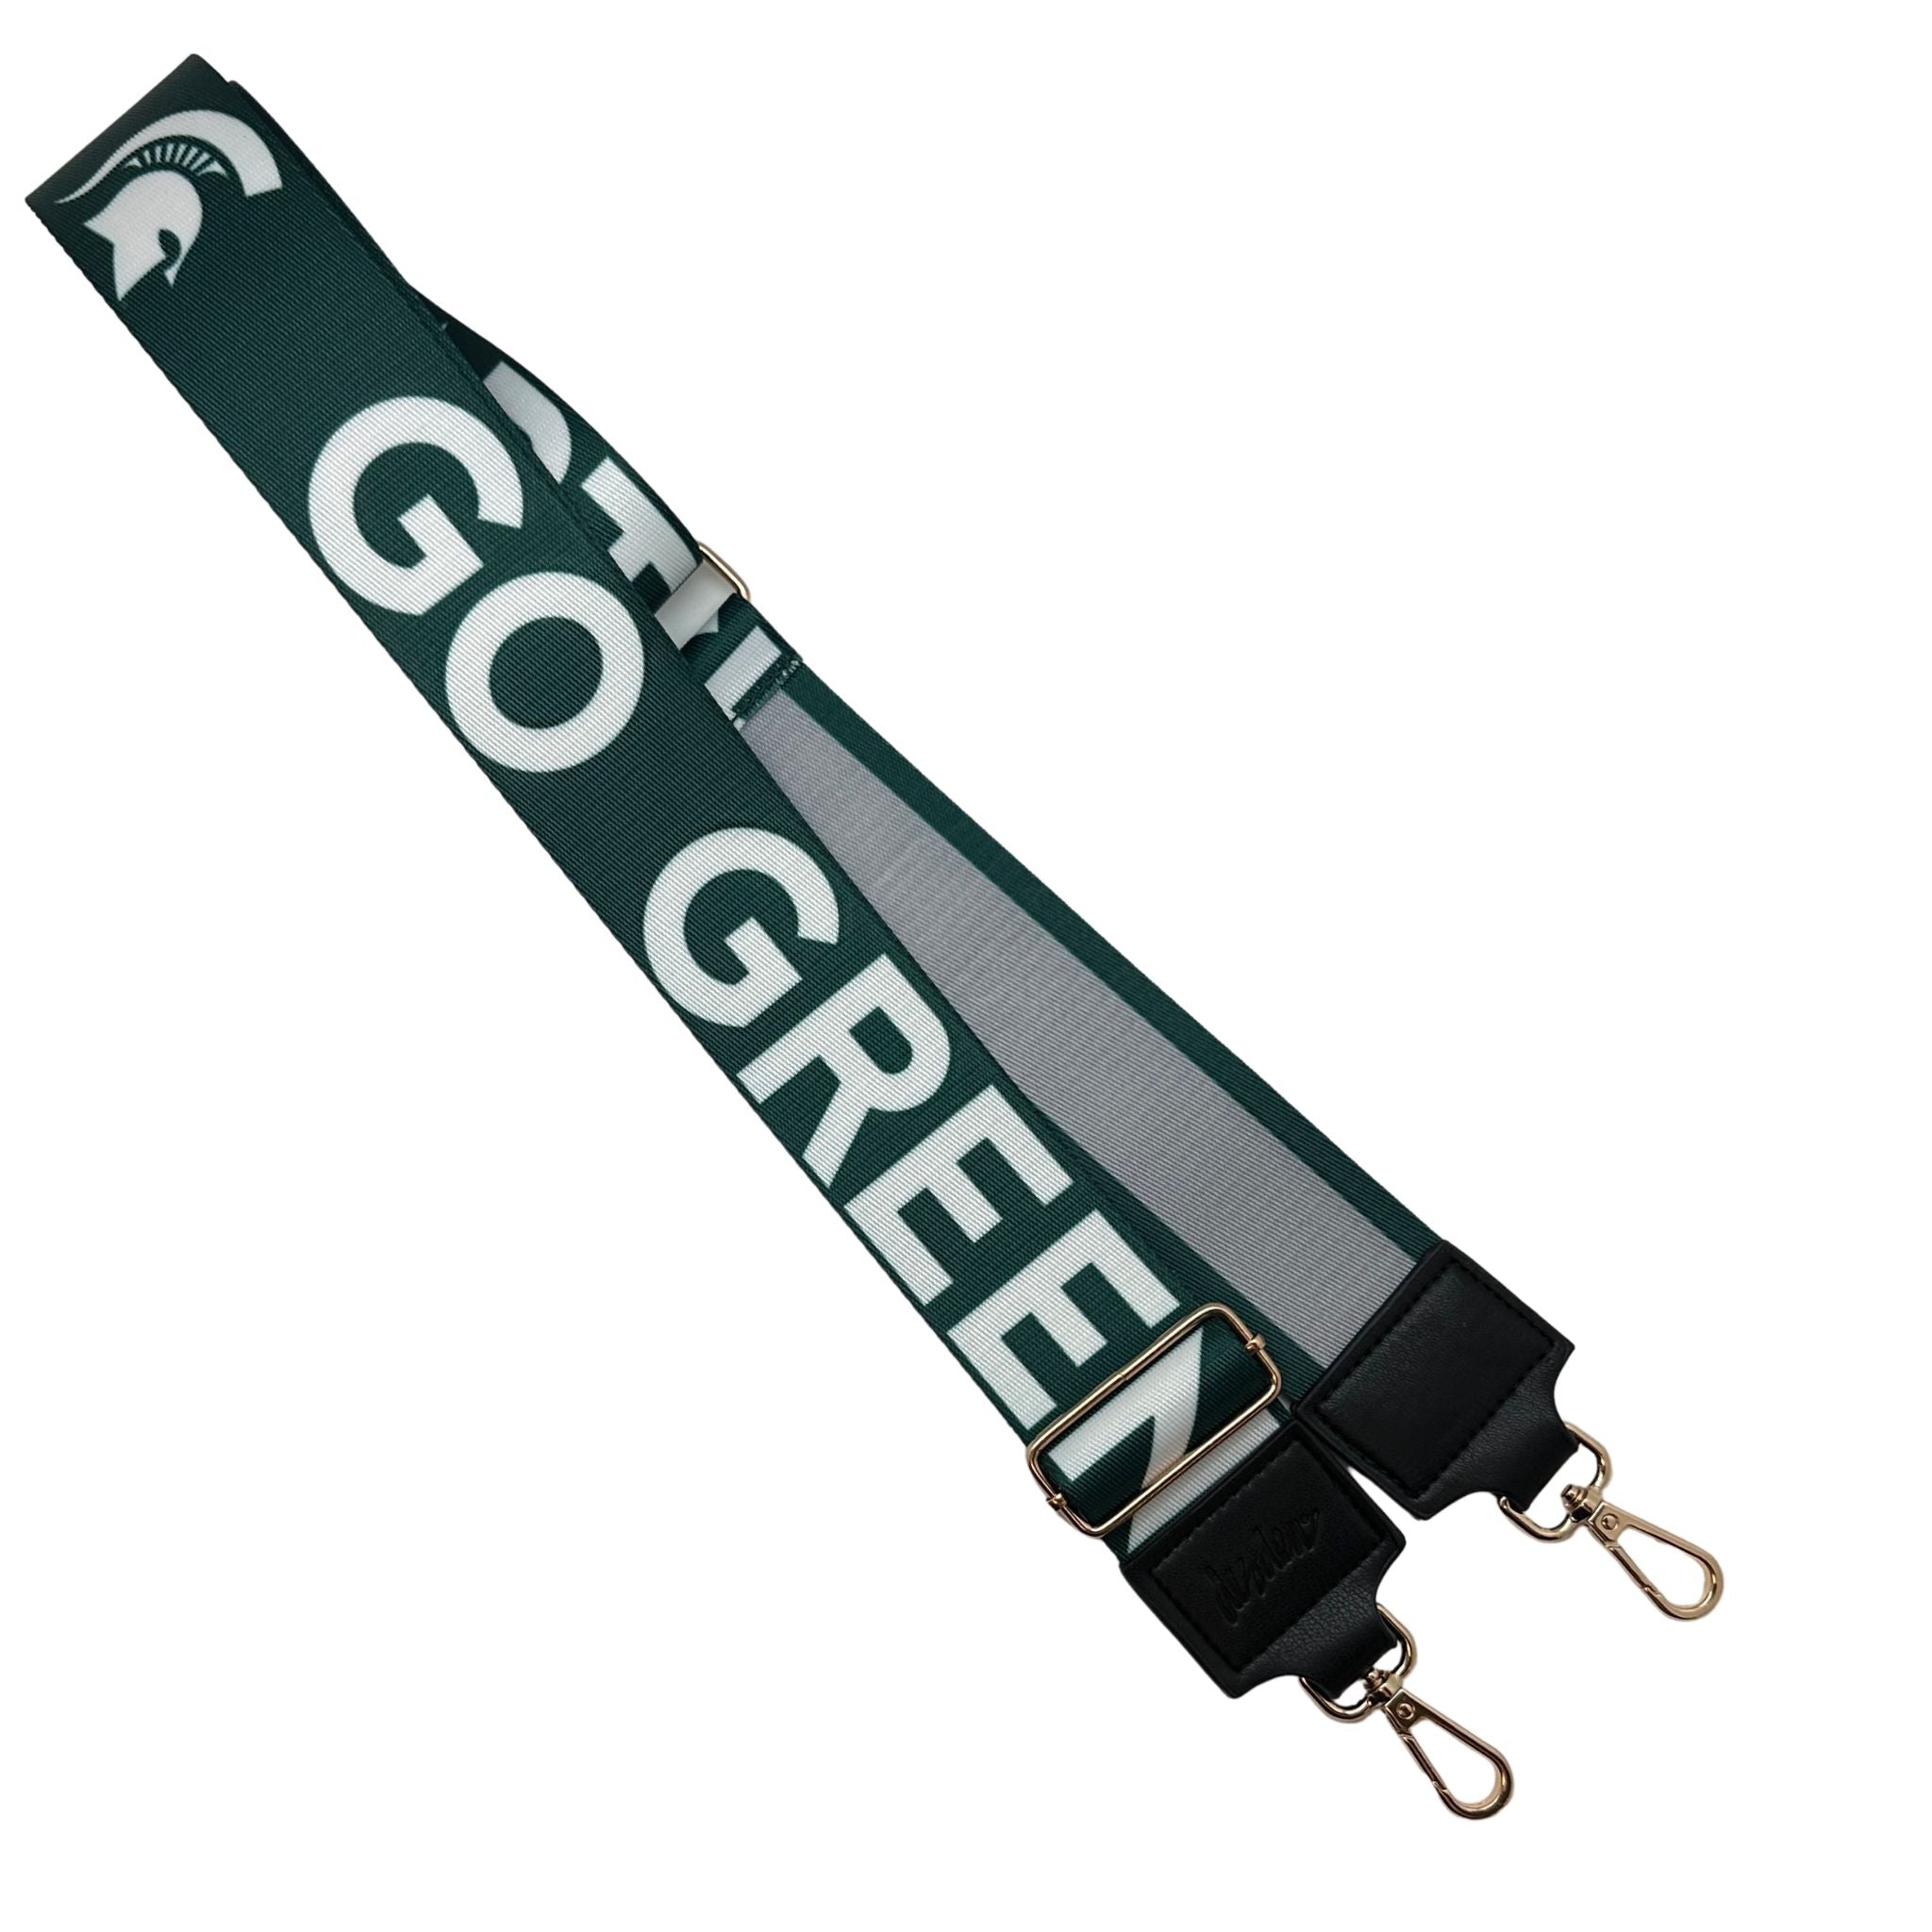 MICHIGAN STATE 2" - Officially Licensed - Stripe